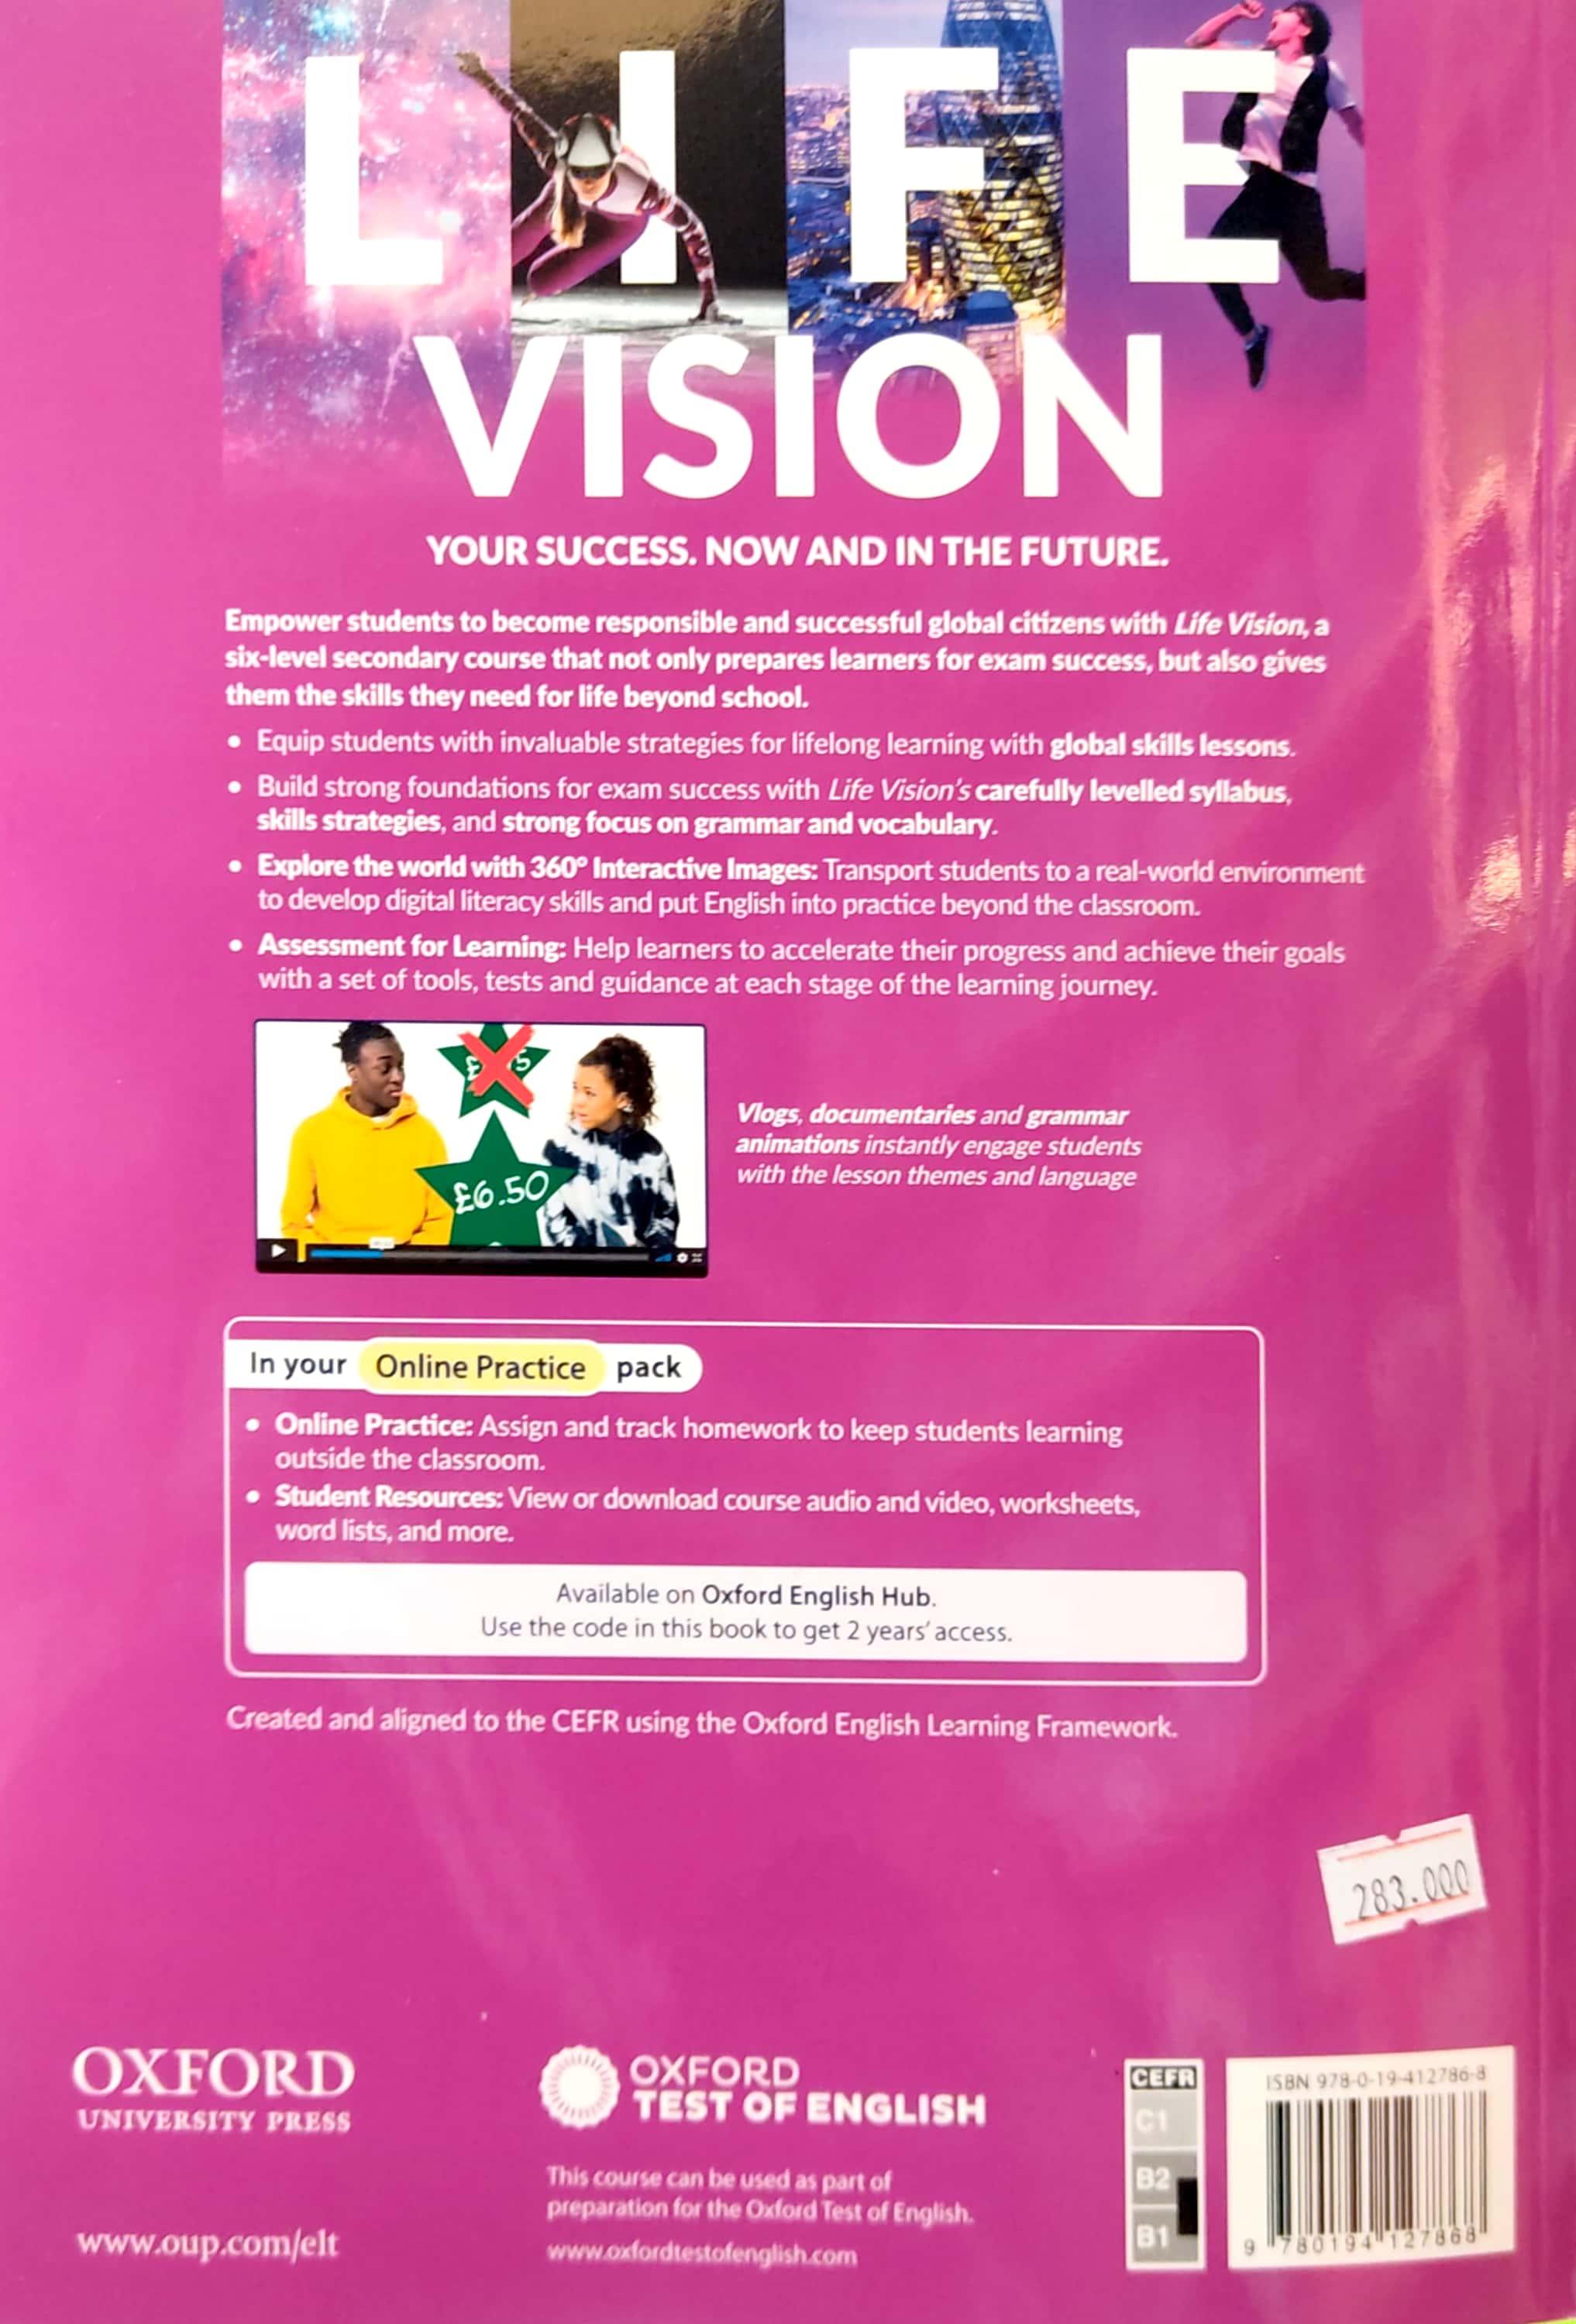 Life Vision Student Book With Online Practice B1+ Intermediate Plus